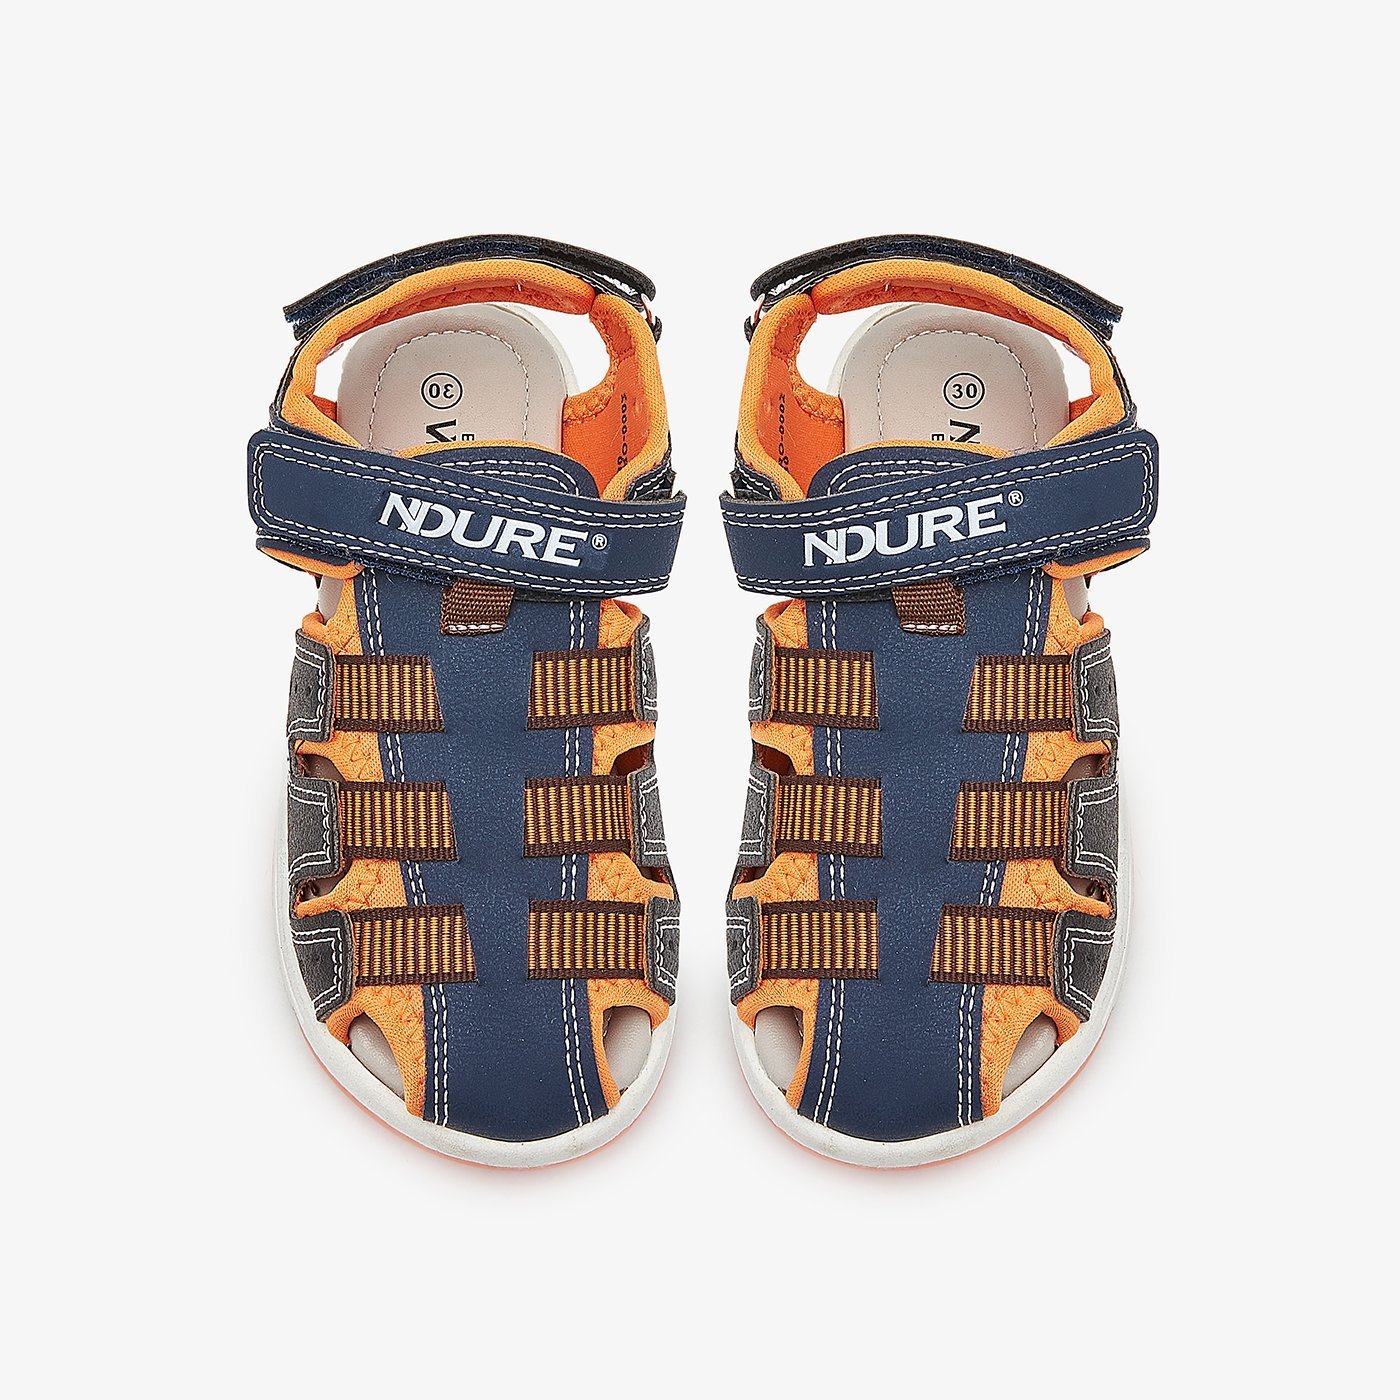 Cage boys sandals